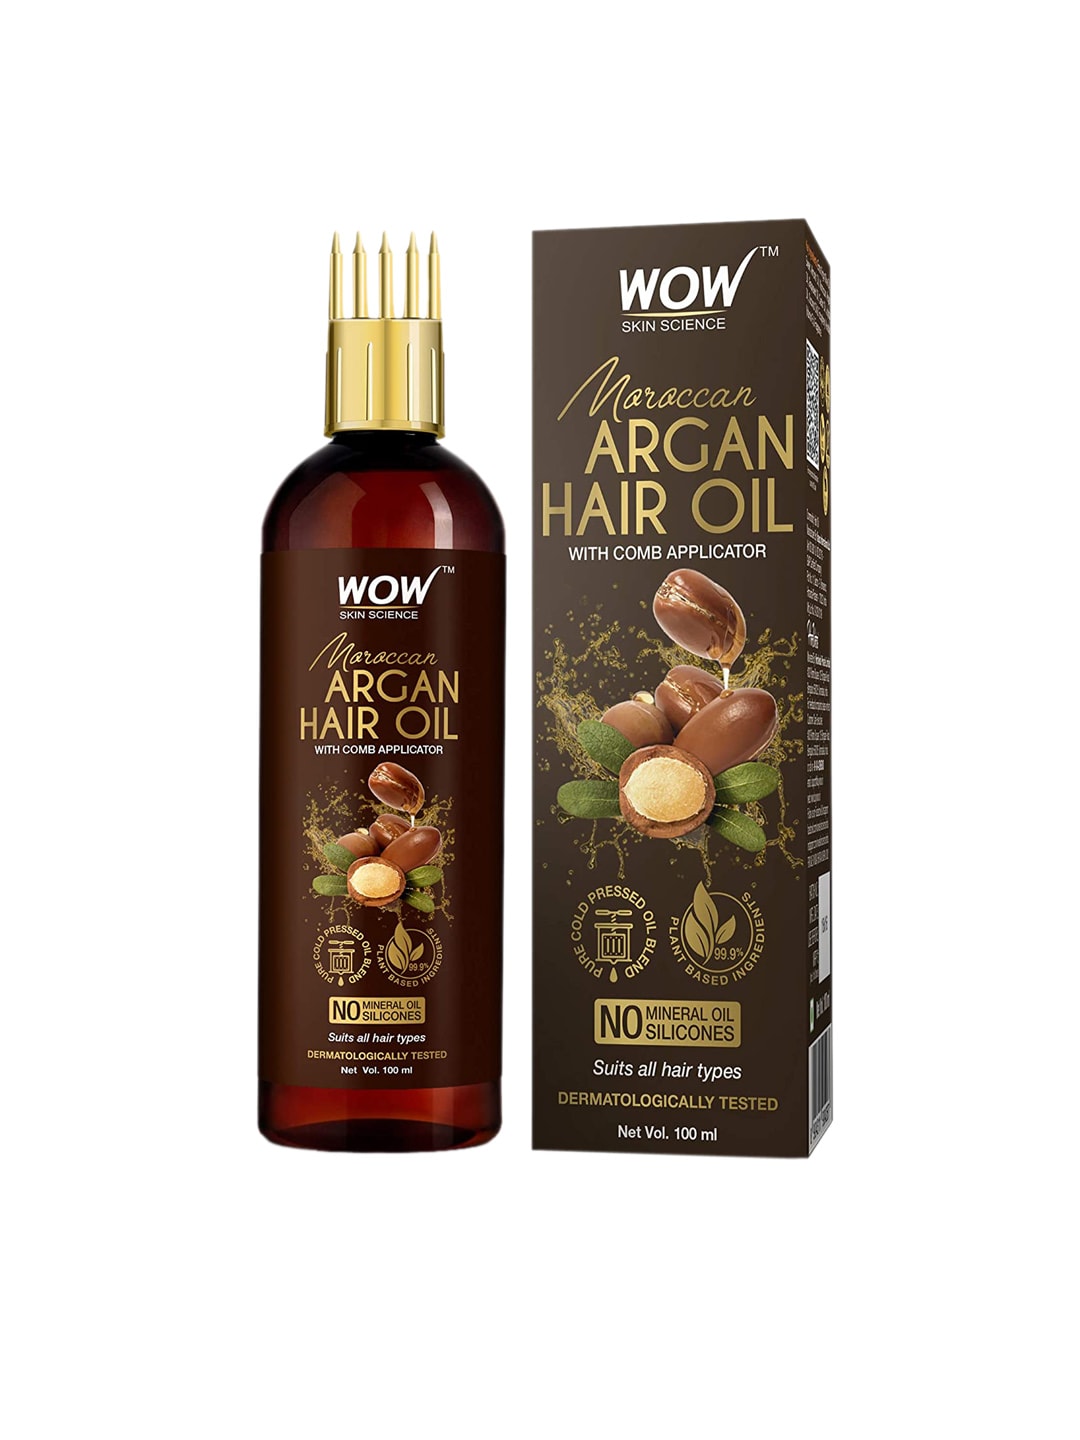 WOW SKIN SCIENCE Moroccan Argan Hair Oil with Comb Applicator 100 ml Price in India